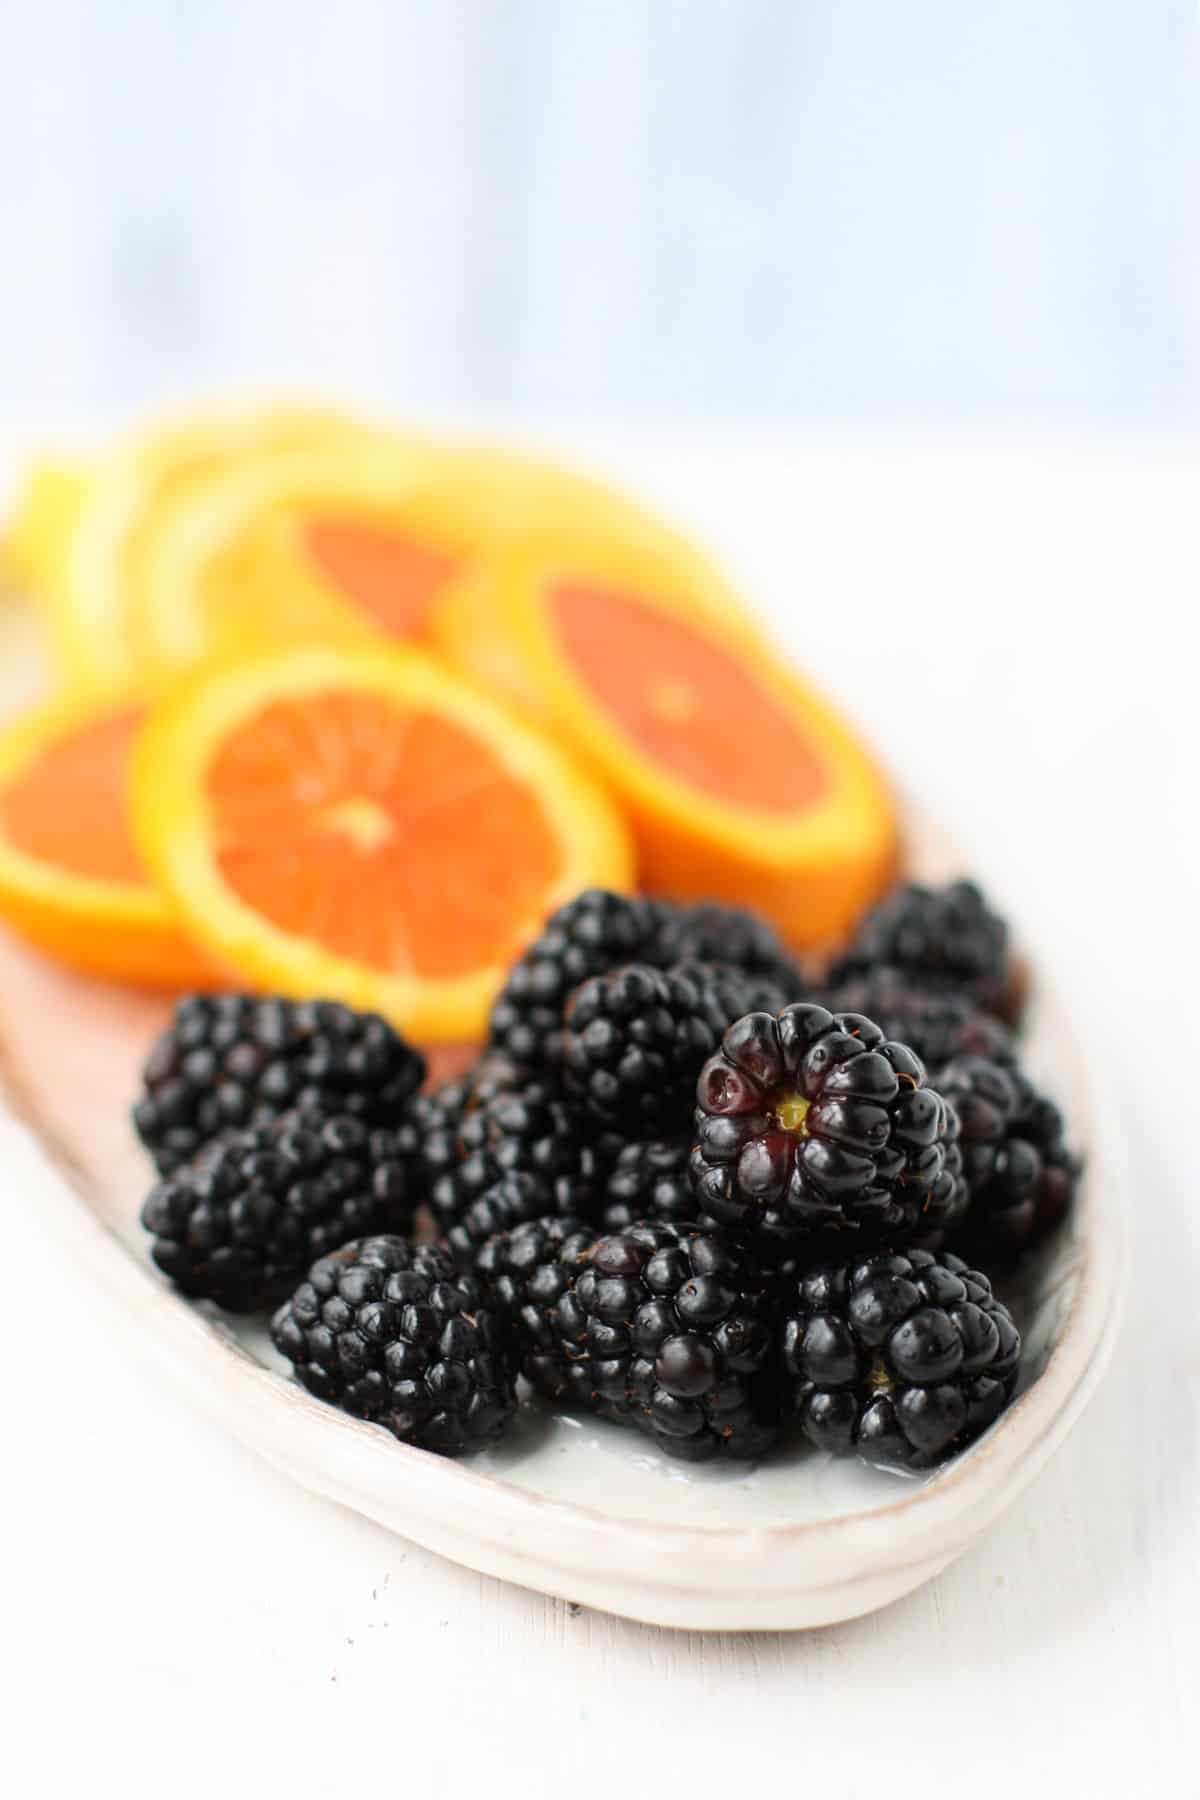 oranges and blackberries on a plate